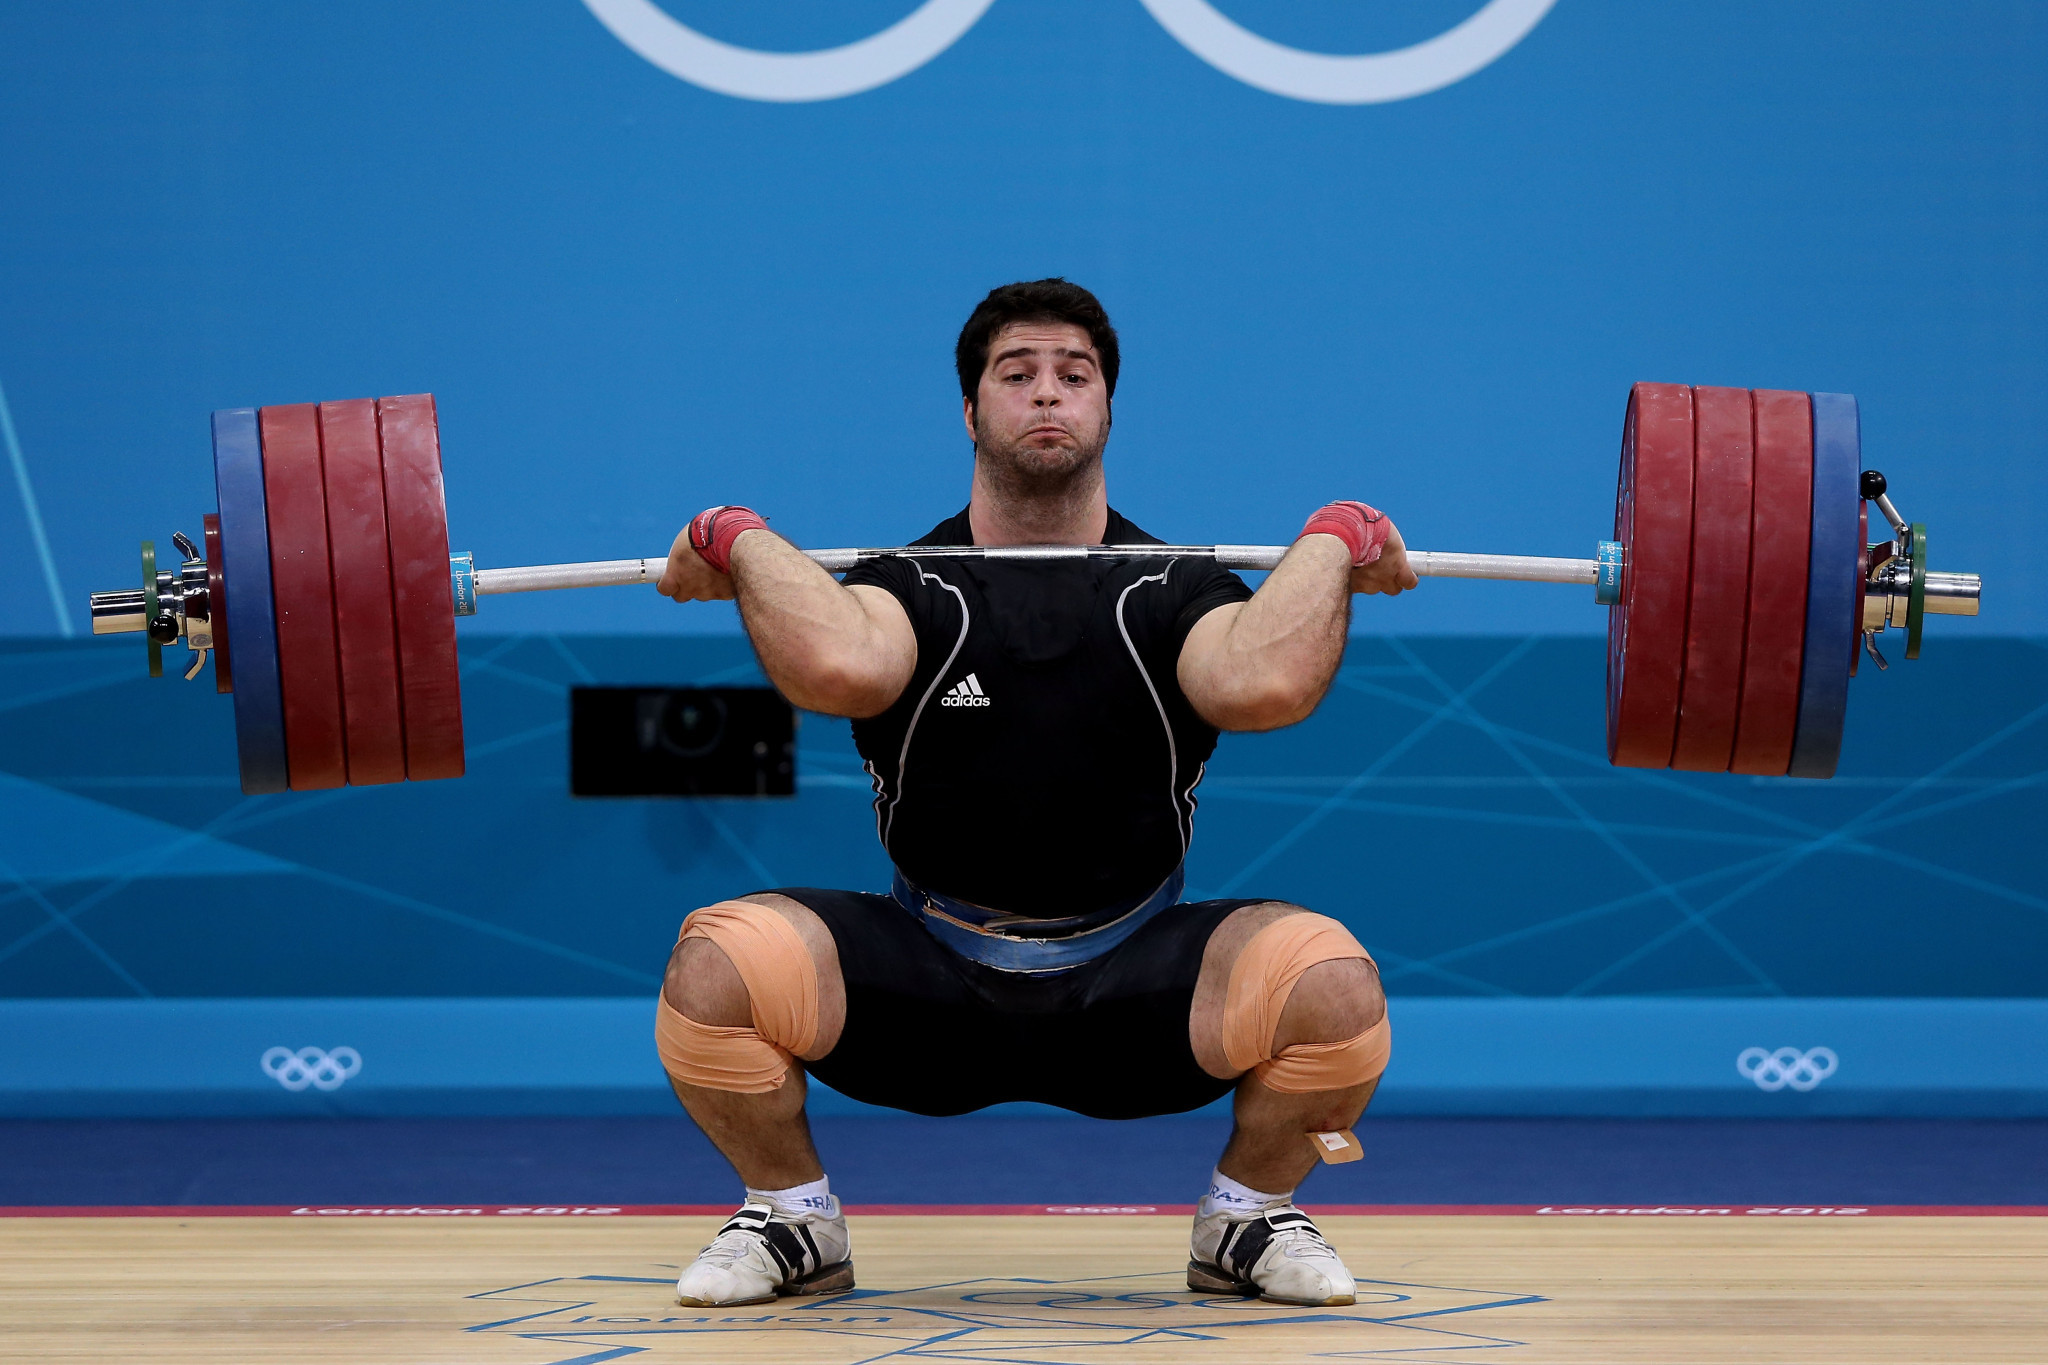 Iran's Navab Nasirshelal has officially been confirmed as the men's 105-kilogram weightlifting champion from London 2012 ©Getty Images